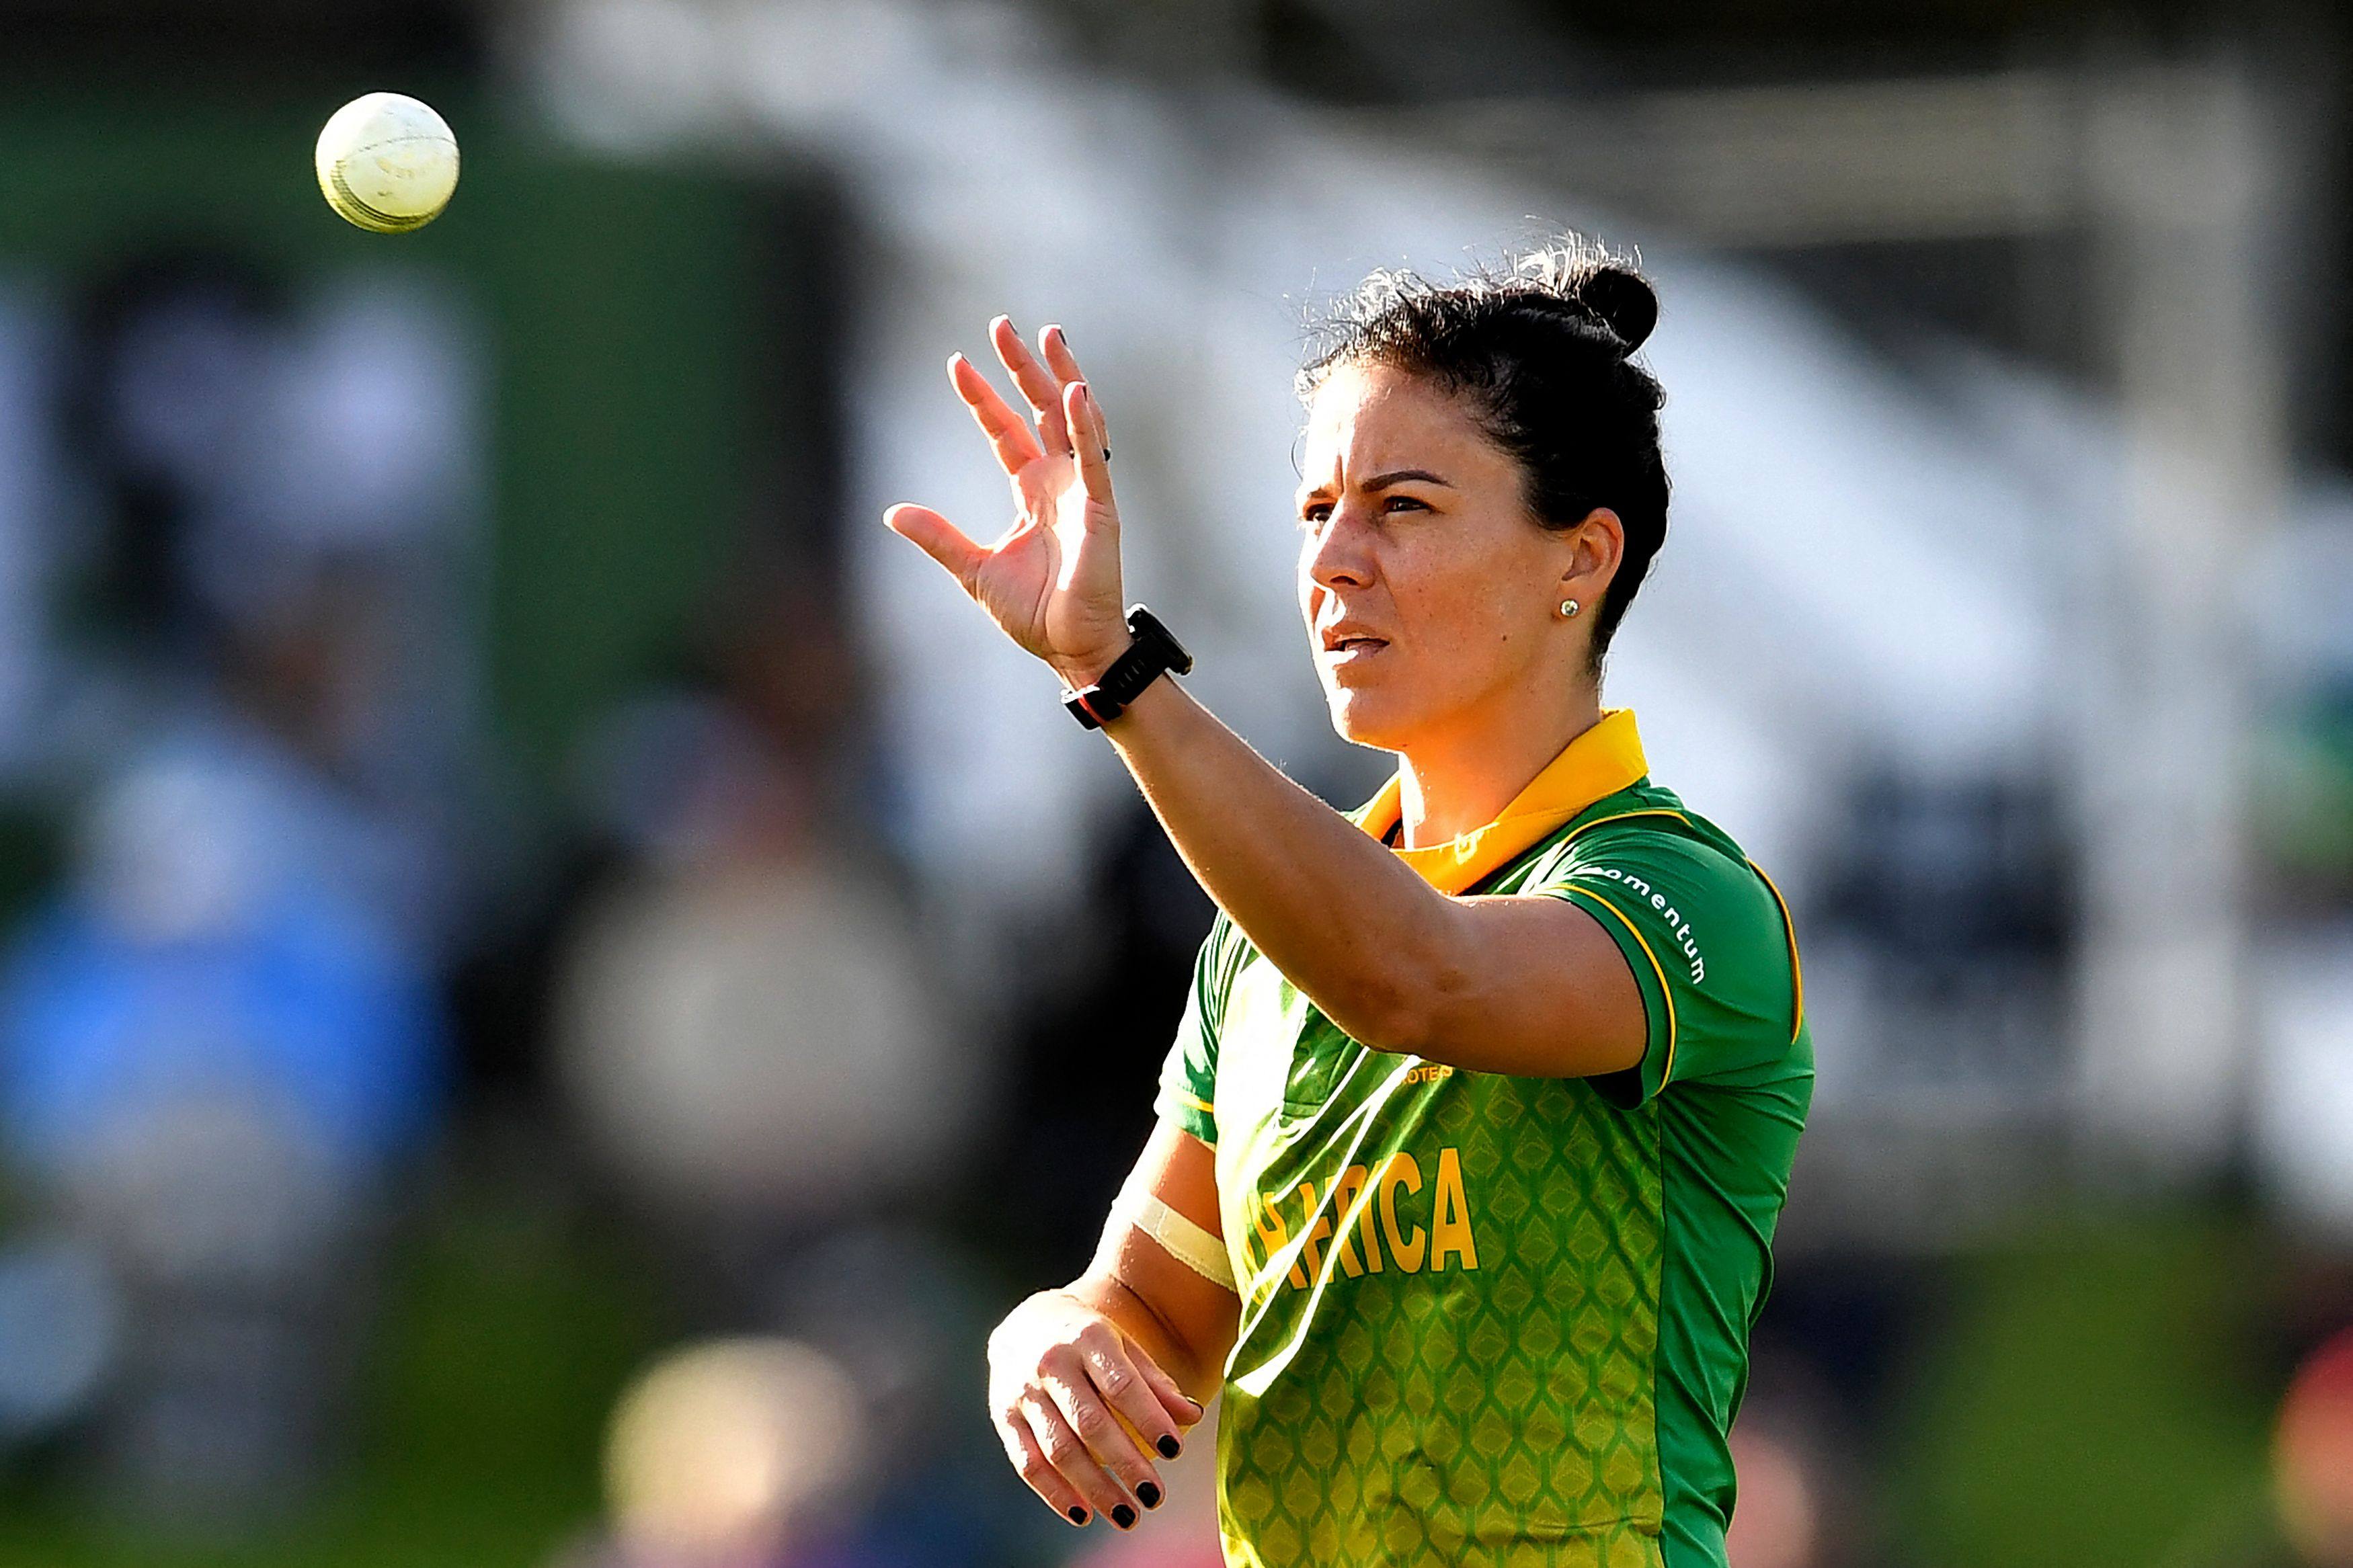 South Africa’s Marizanne Kapp will play in the World Cup and was a member of the Falcons team at the 2022 FairBrek Invitational in Dubai. Photo: AFP